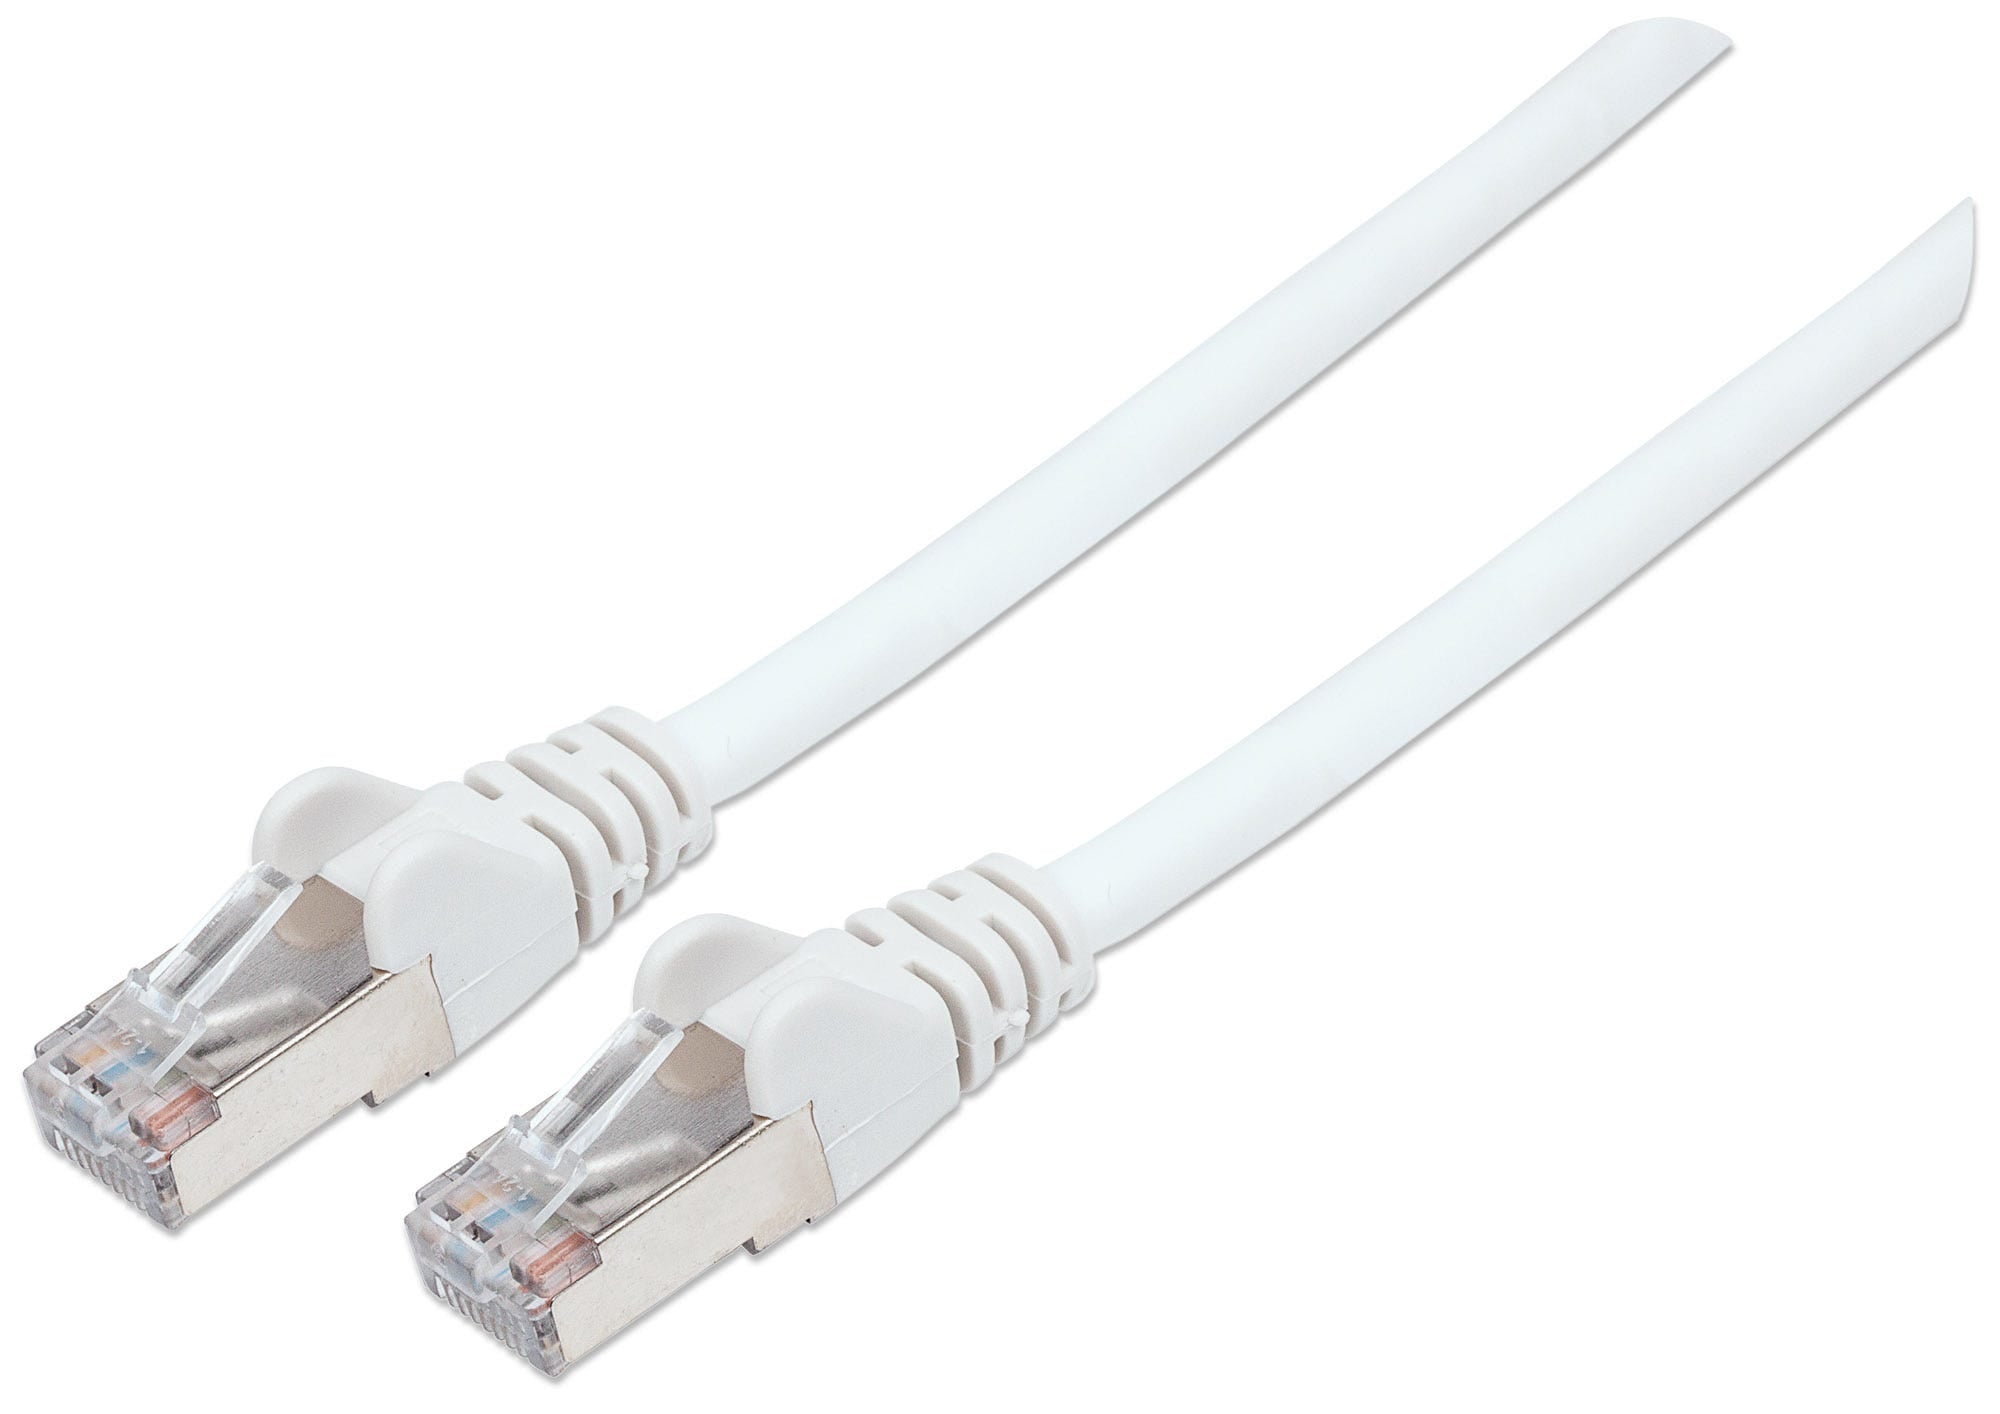 Intellinet Network Patch Cable, Cat6, 2m, White, Copper, S/FTP, LSOH / LSZH, PVC, RJ45, Gold Plated Contacts, Snagless, Booted, Lifetime Warranty, Polybag